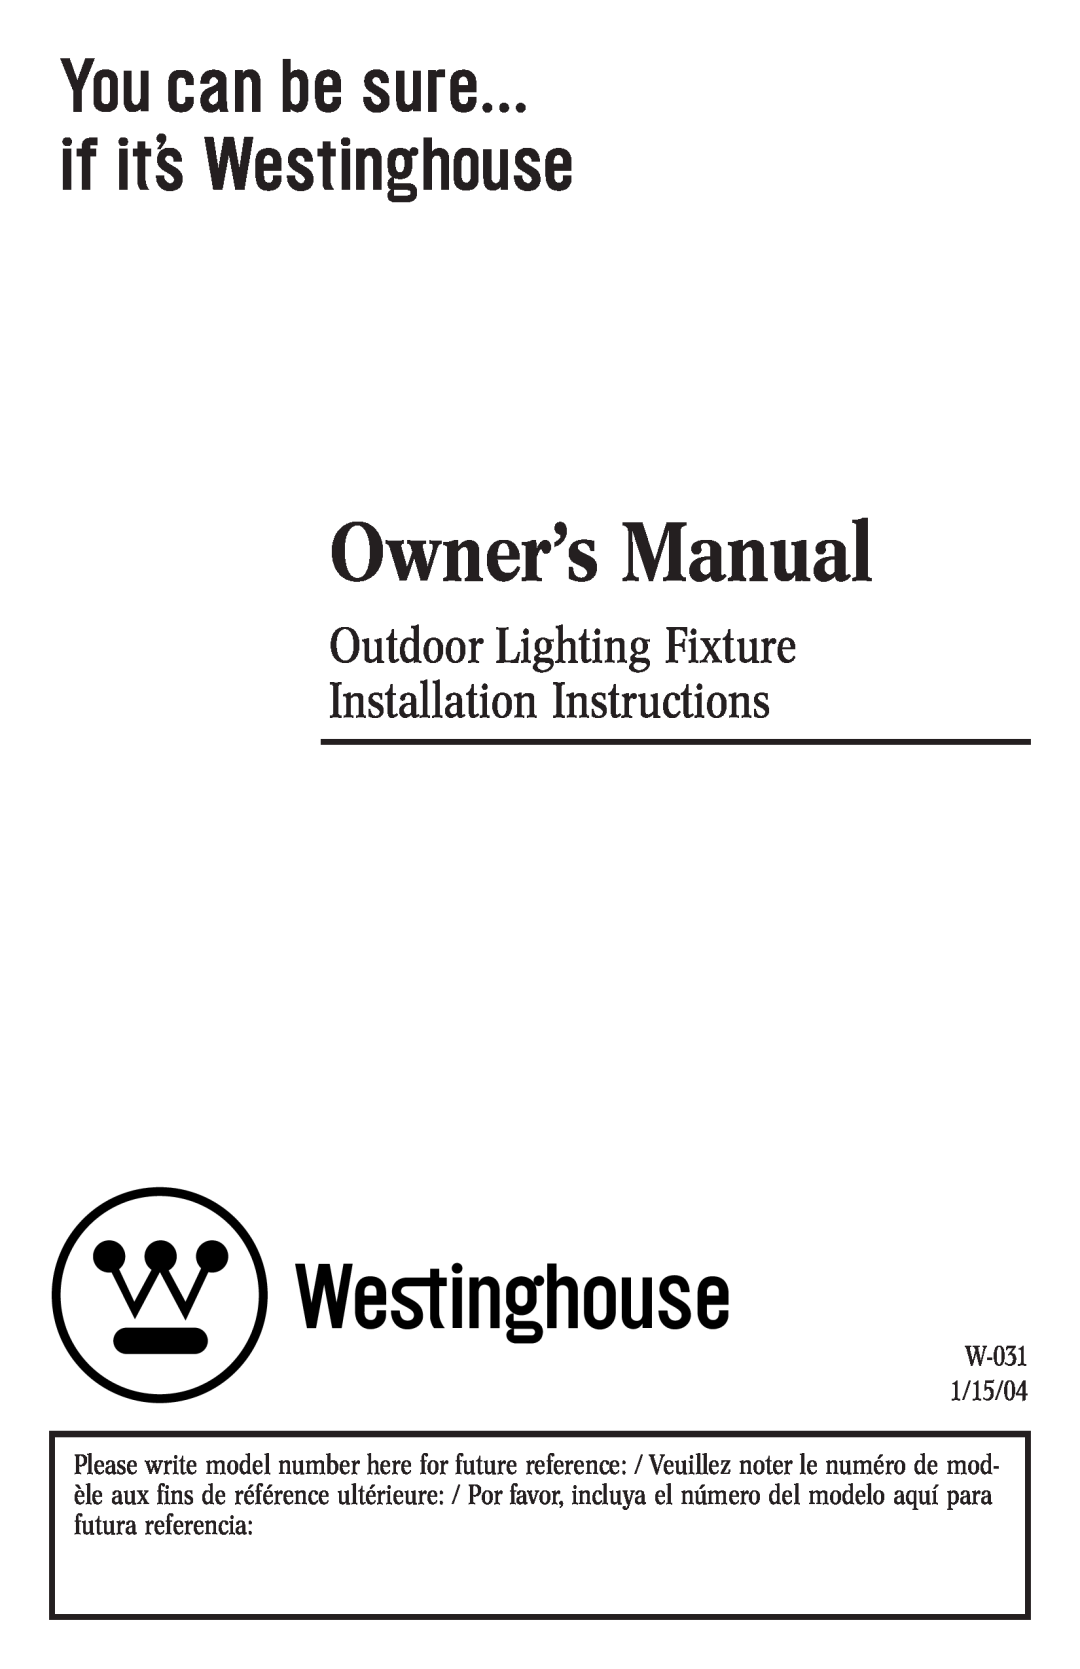 Westinghouse w-031 owner manual Outdoor Lighting Fixture Installation Instructions 